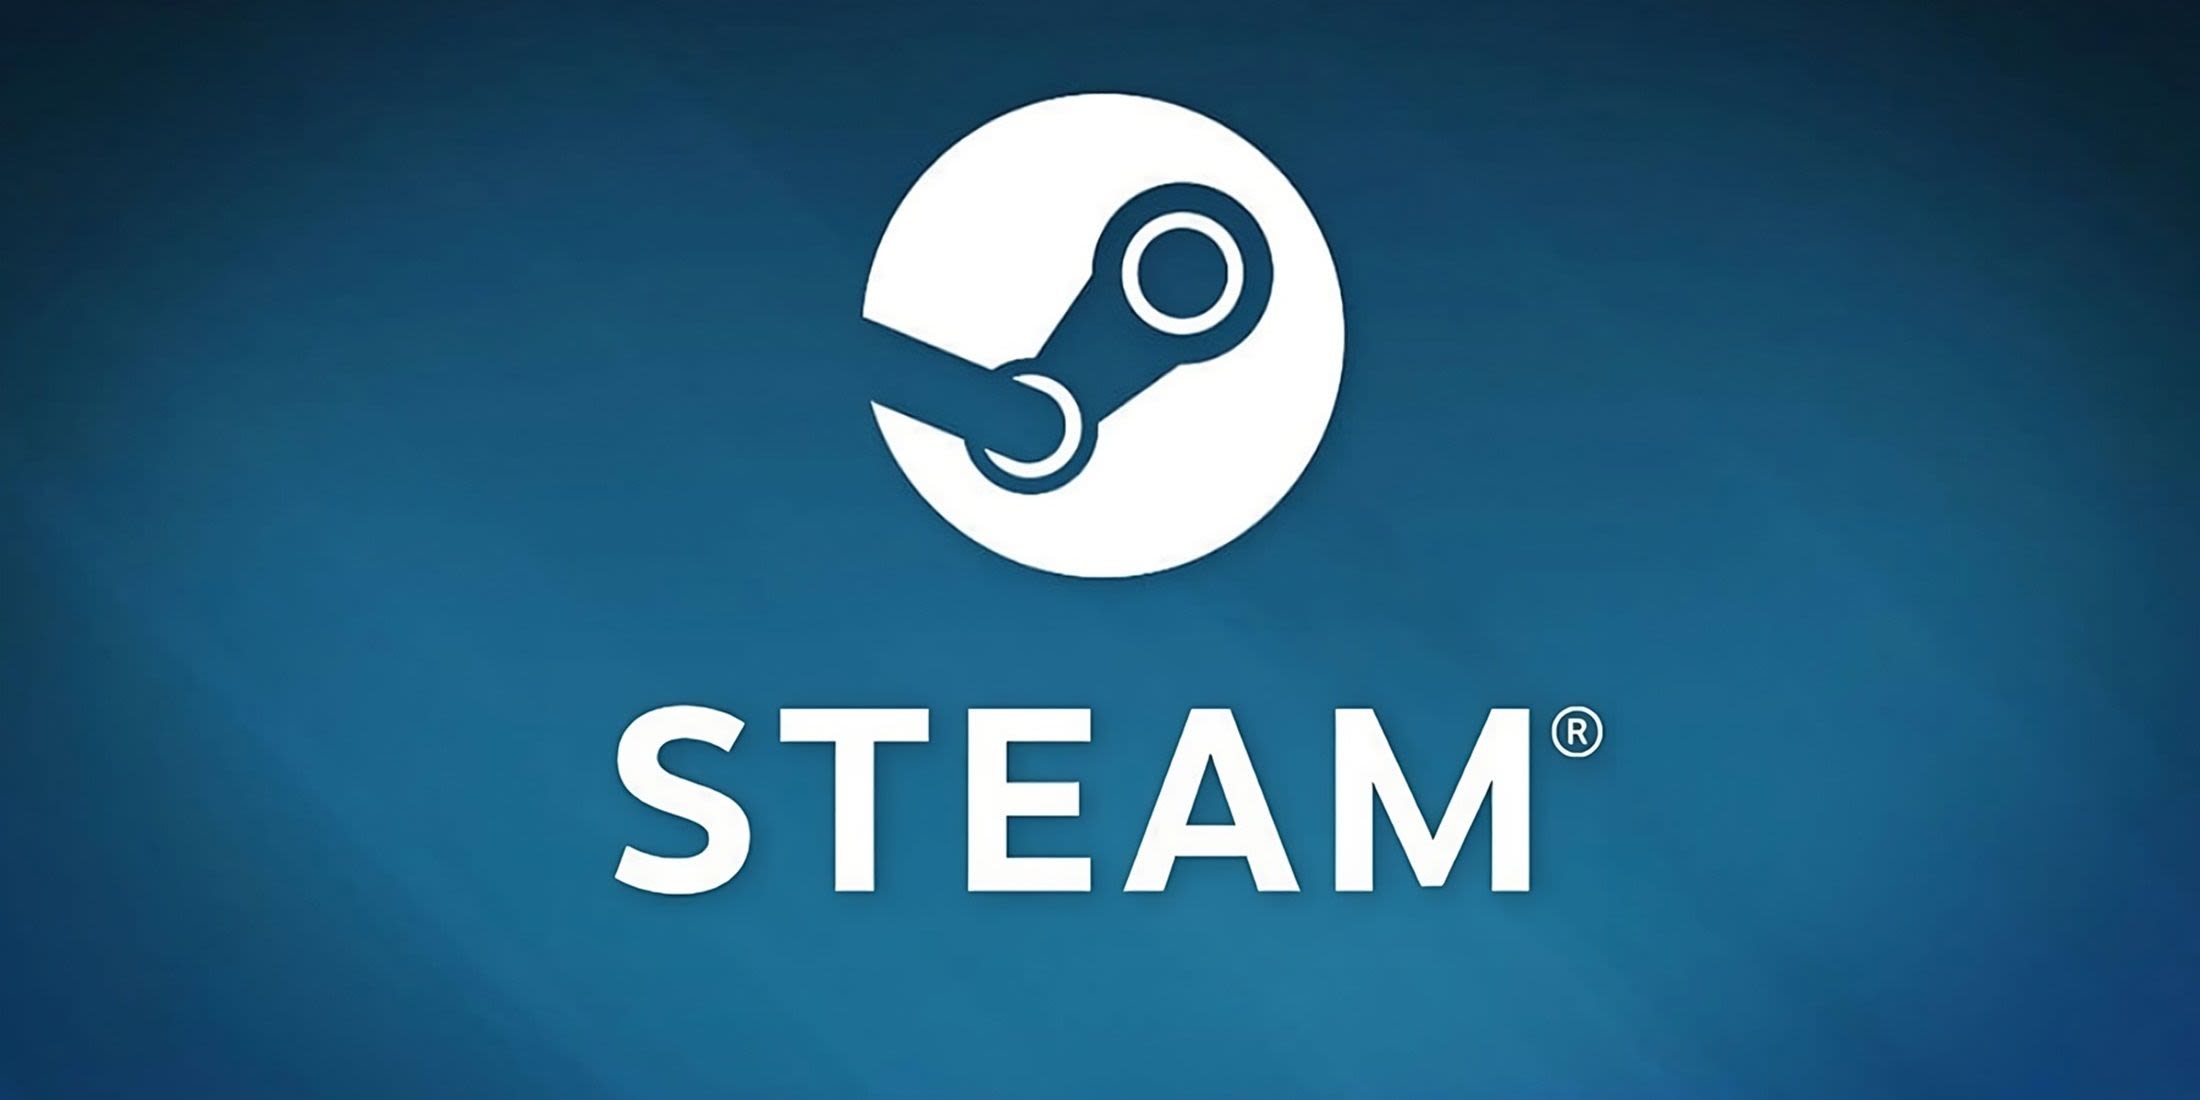 Steam Game With 'Very Positive' Reviews is Free to Claim Right Now